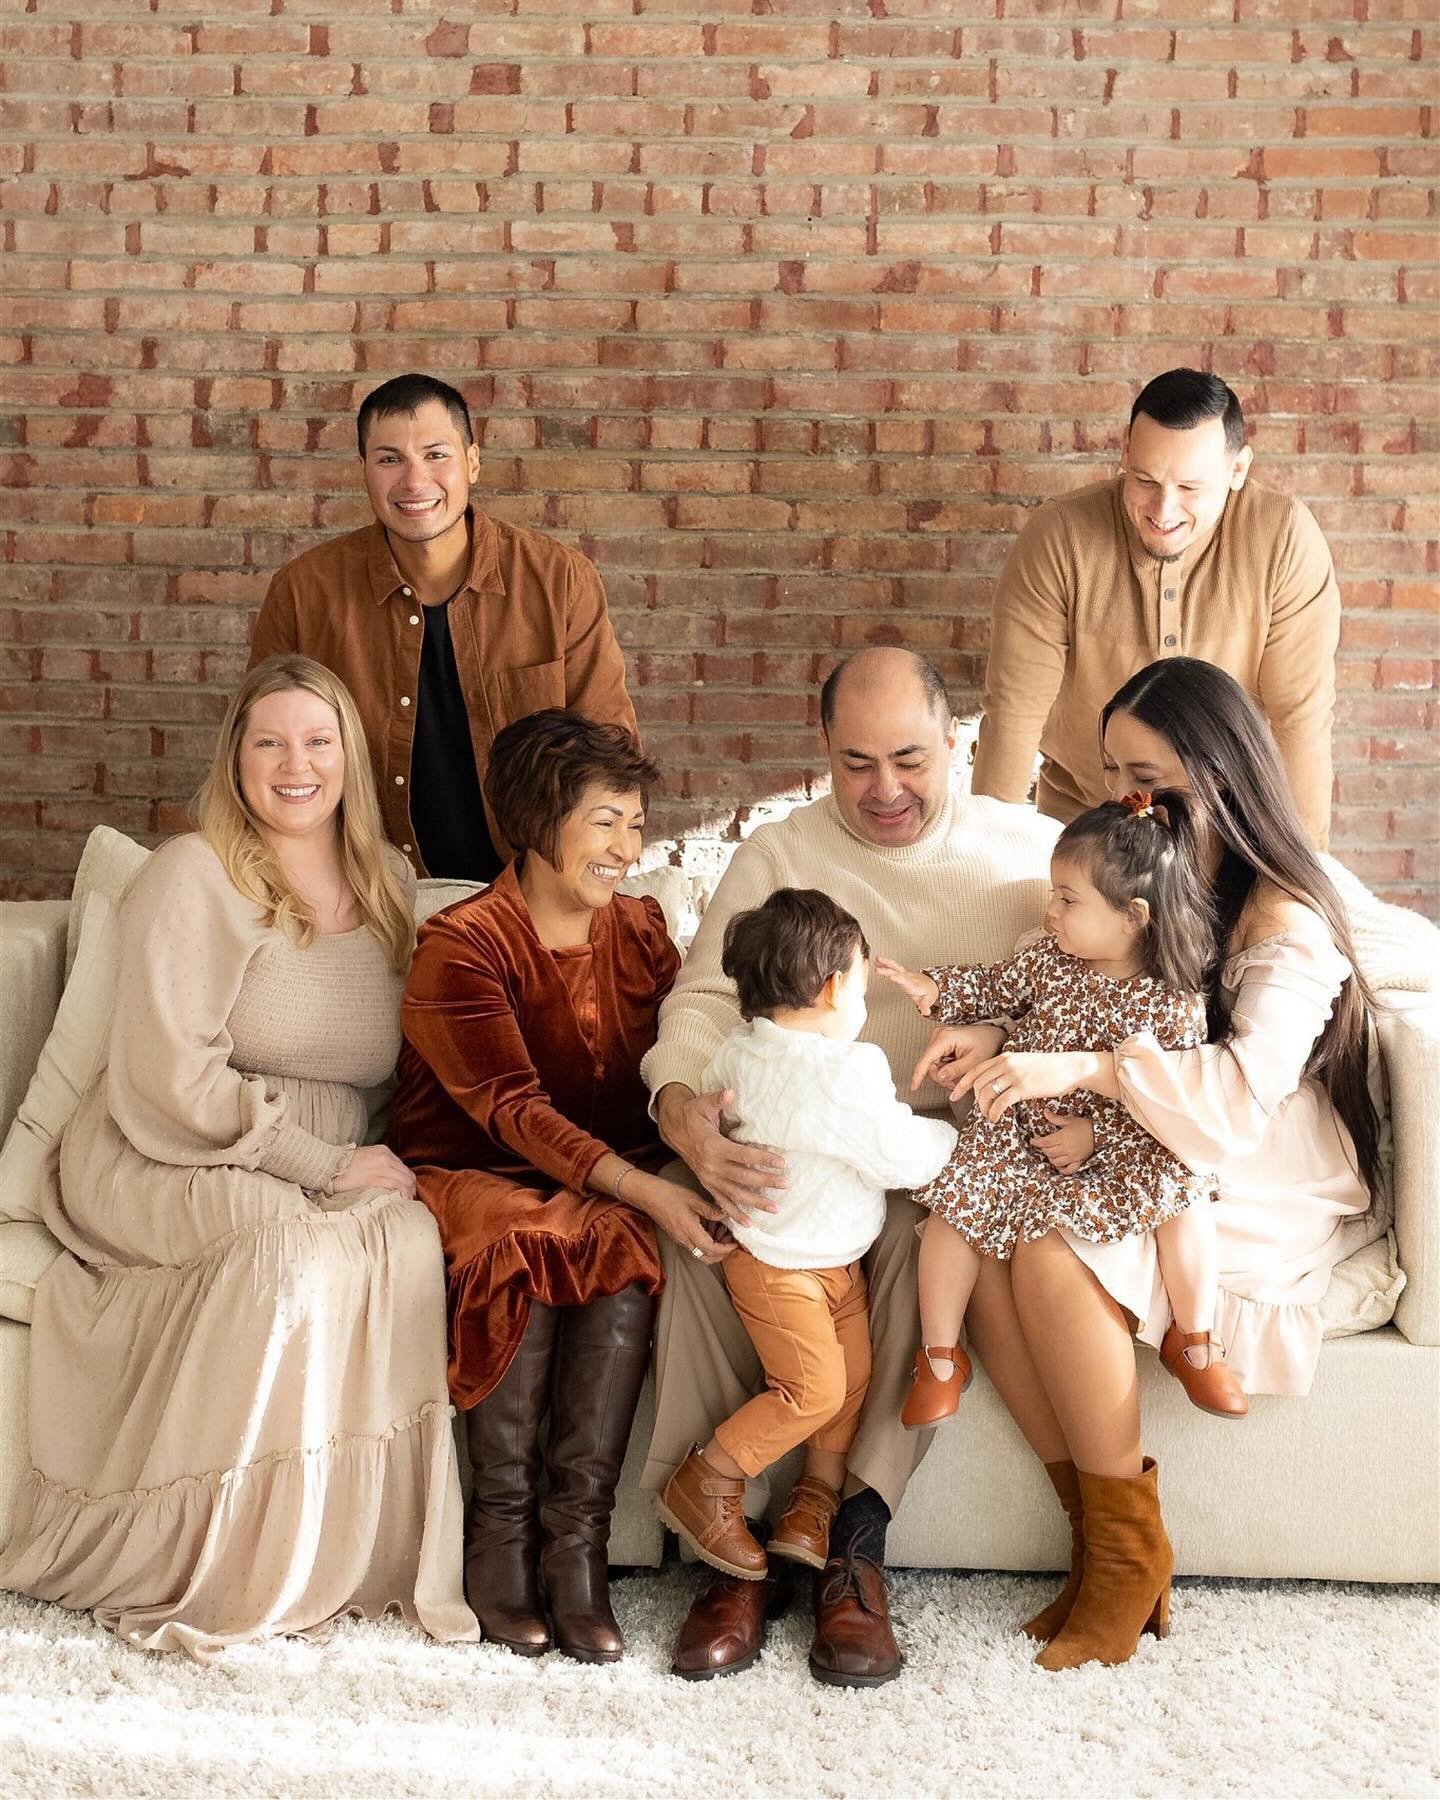 The styling here was perfection 👌
But honestly, they could have all show up in sweatpants and I still probably would have cried during editing. Love this beautiful family and so grateful to capture their love 🤍

I&rsquo;ve said it before and I&rsqu